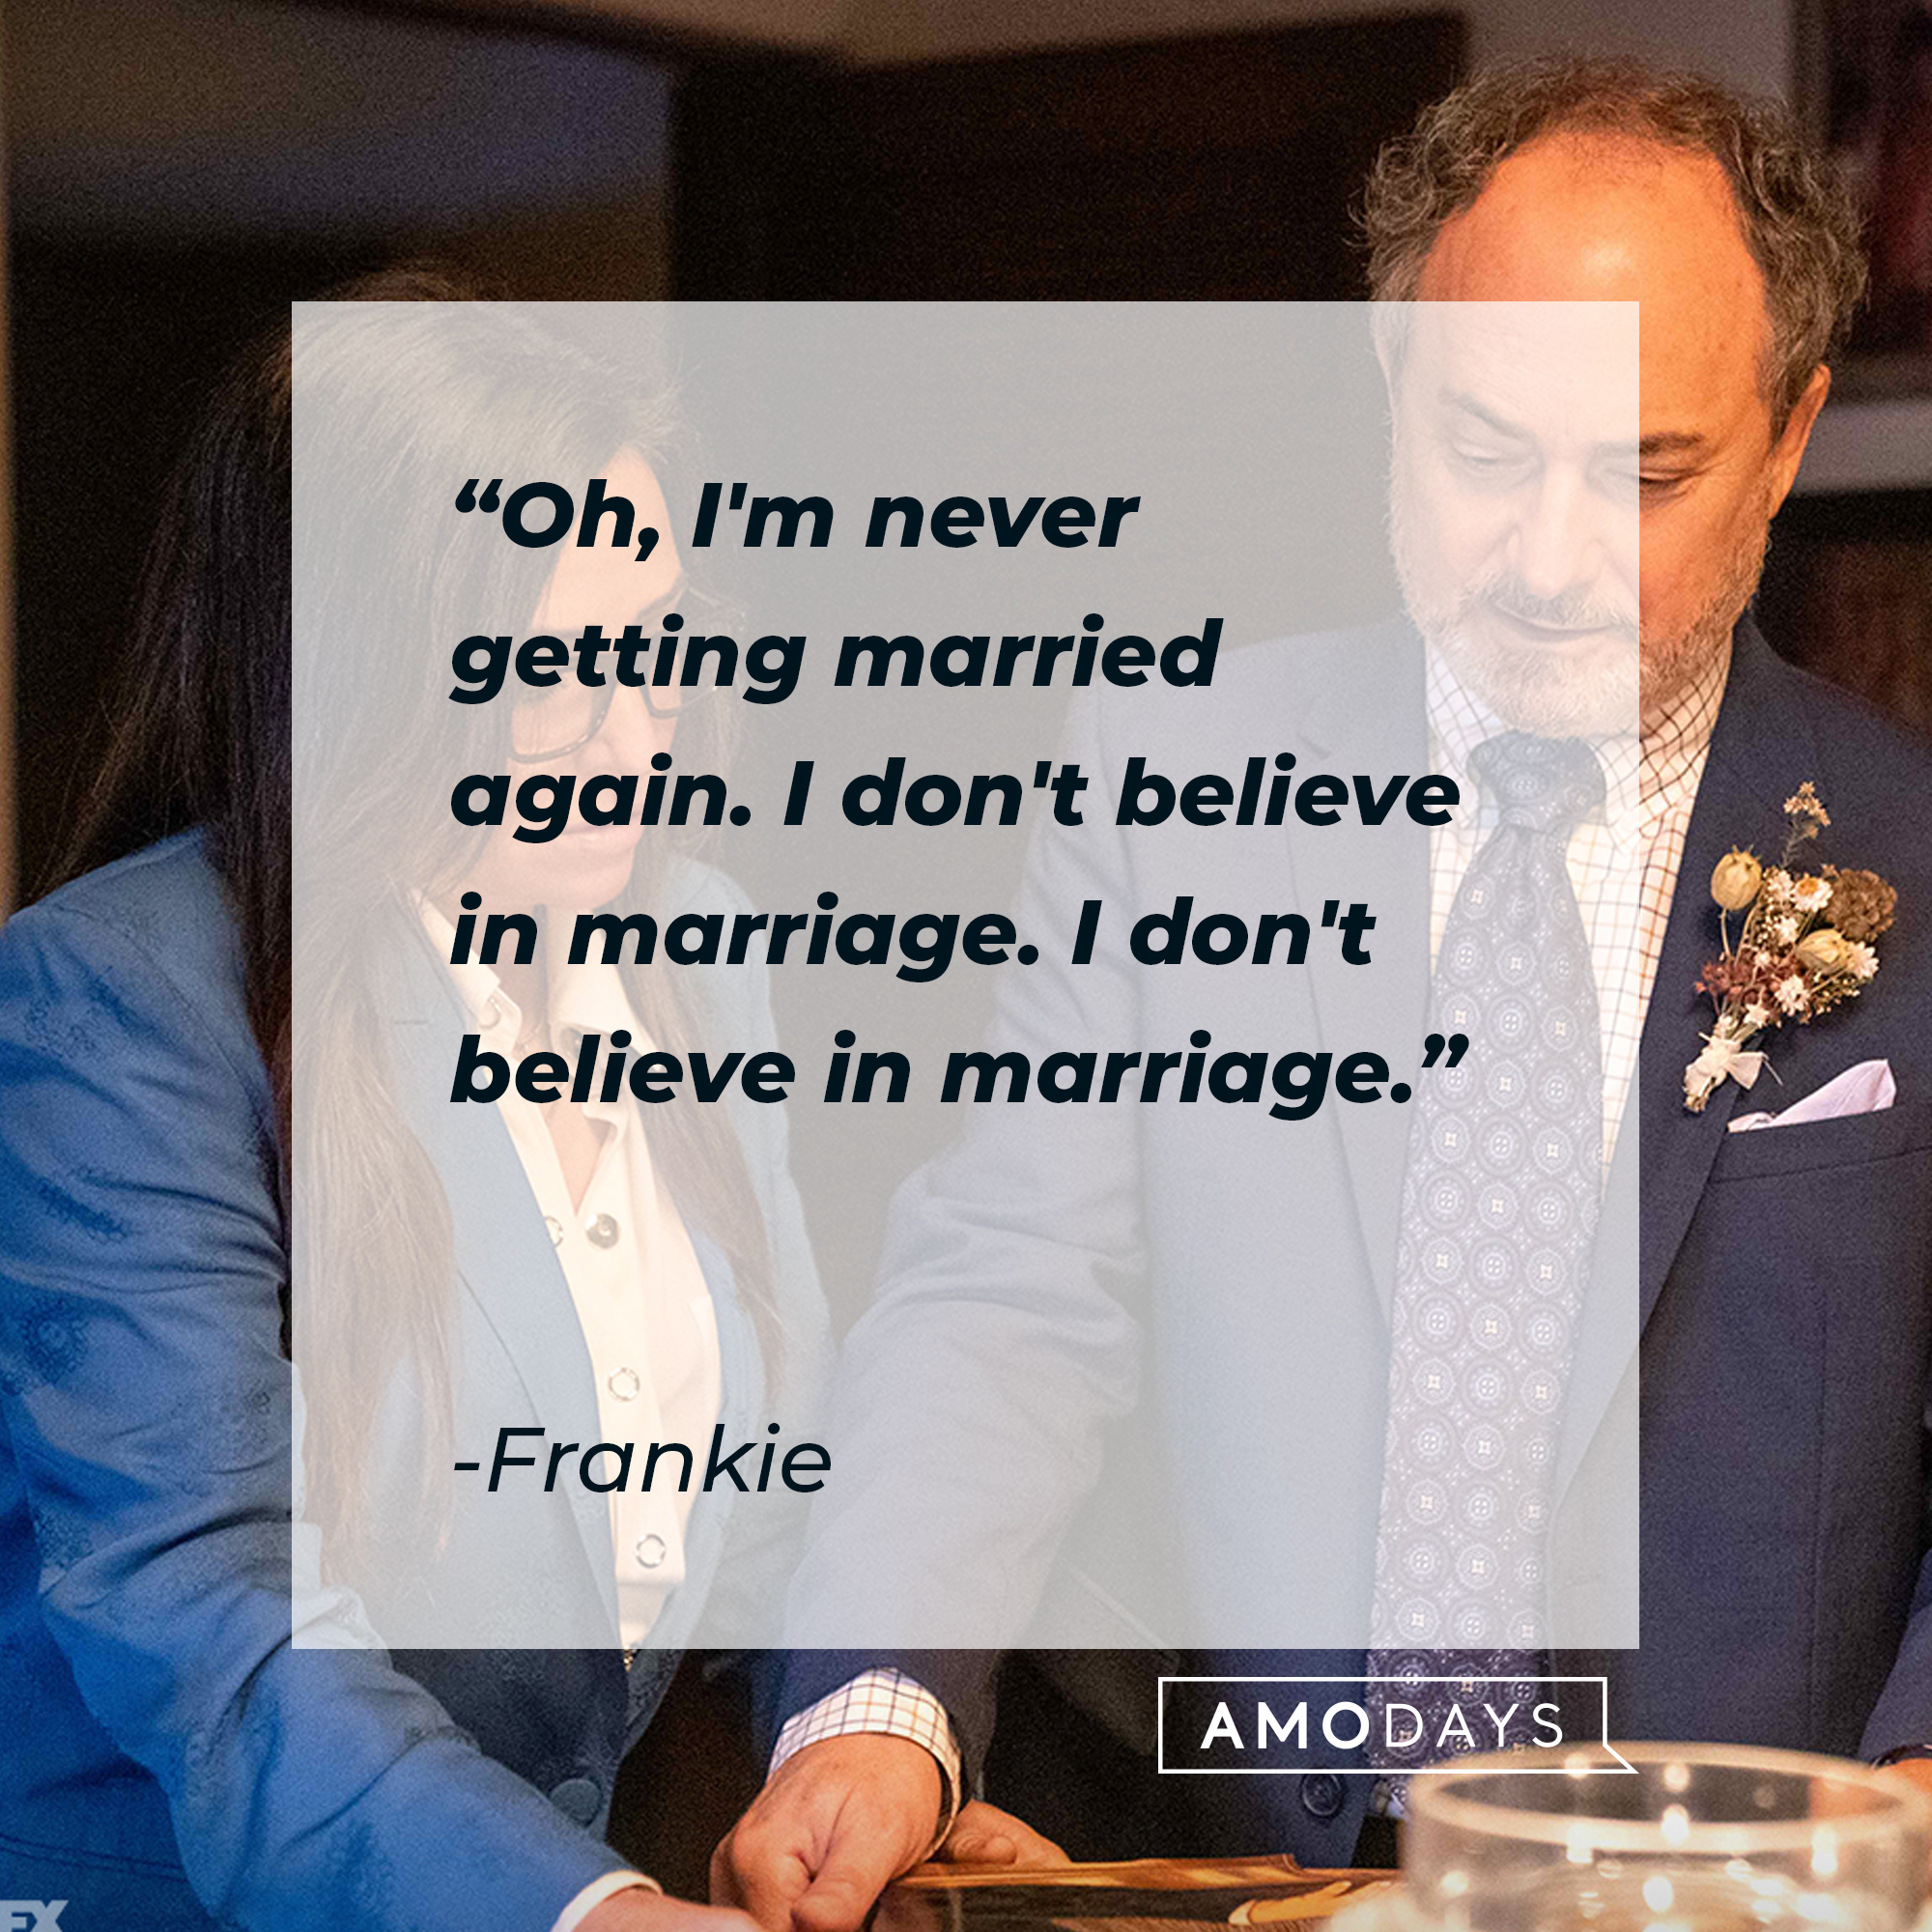 Frankie's quote: "Oh, I'm never getting married again. I don't believe in marriage. I don't believe in marriage." | Source: facebook.com/BetterThingsFX